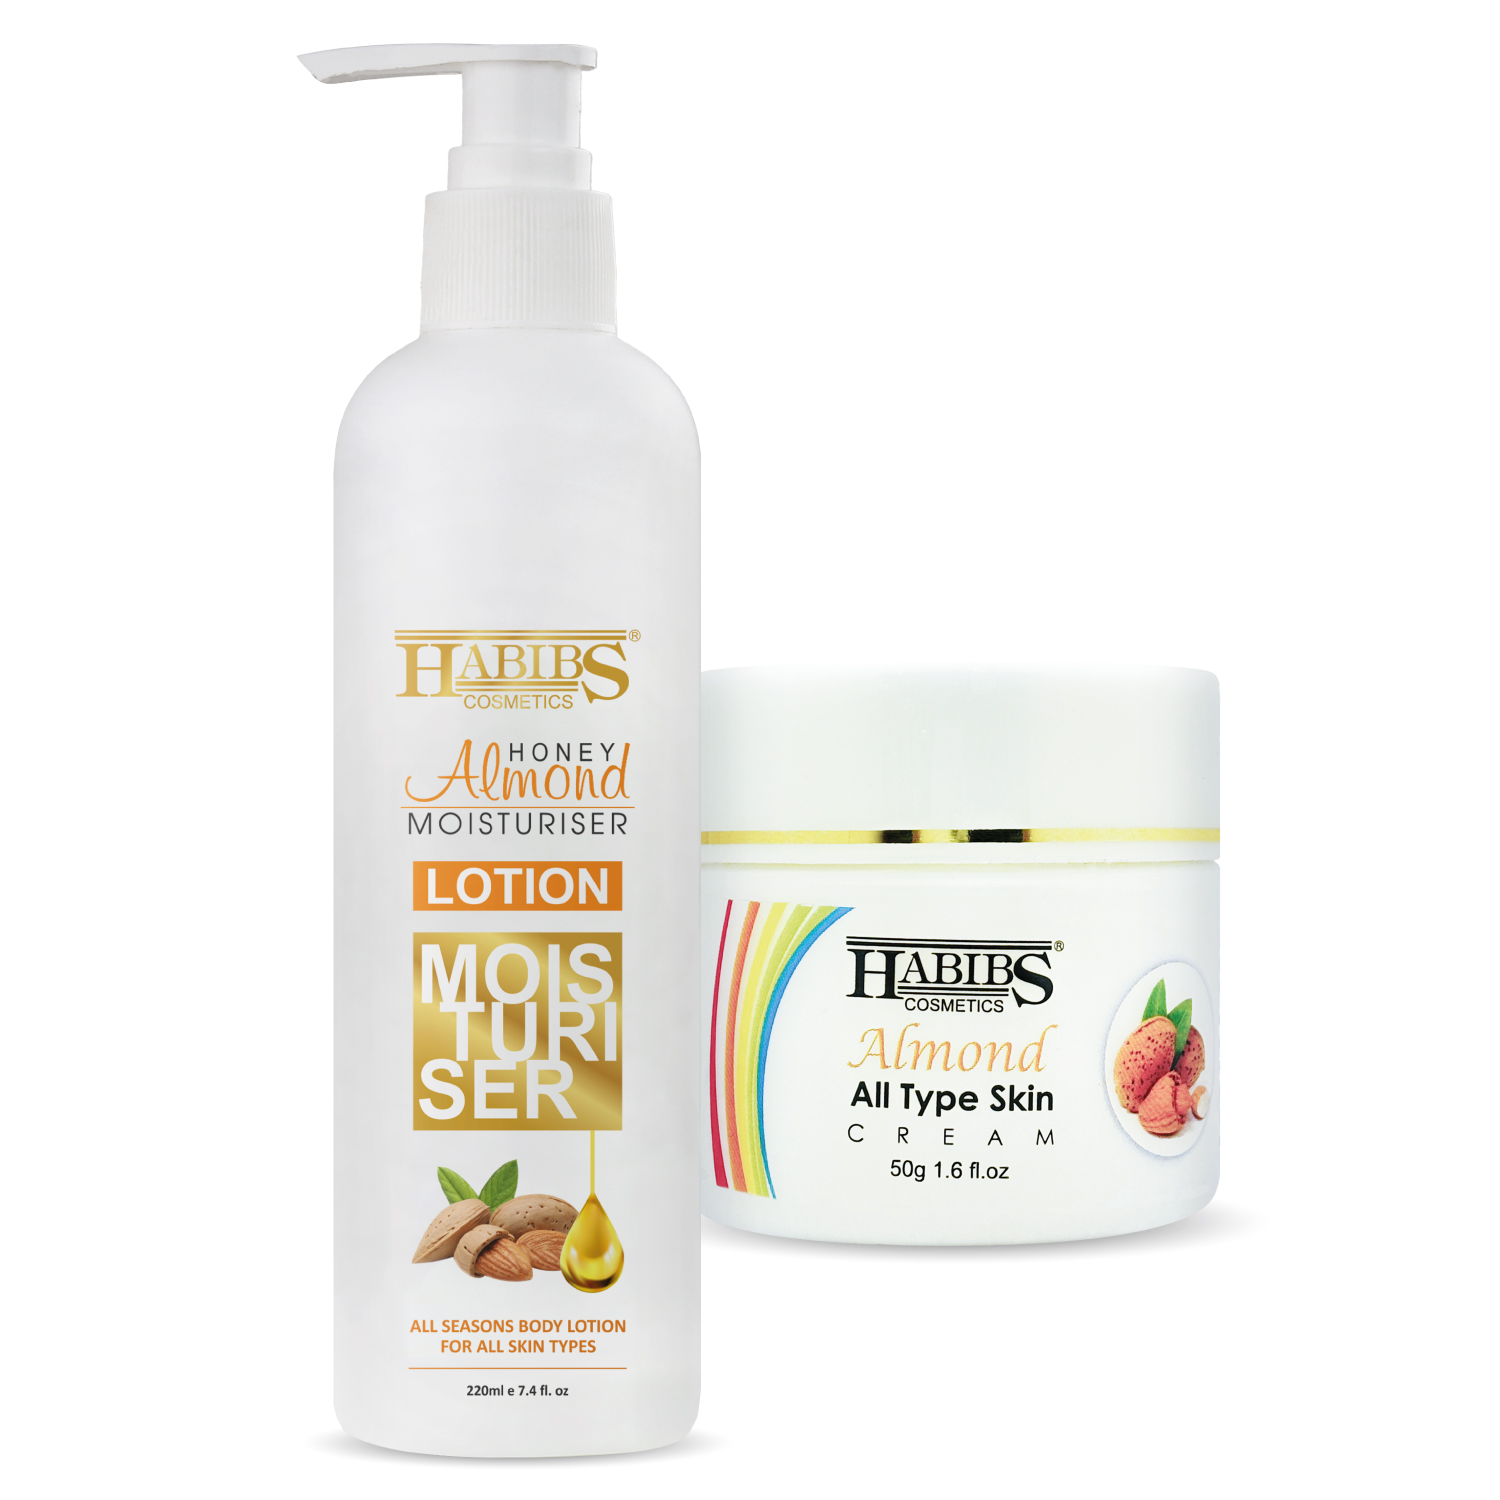 Habibs Body Lotion & Almond Cream for Extra Hydrating for Dry Skin, Non-Greasy